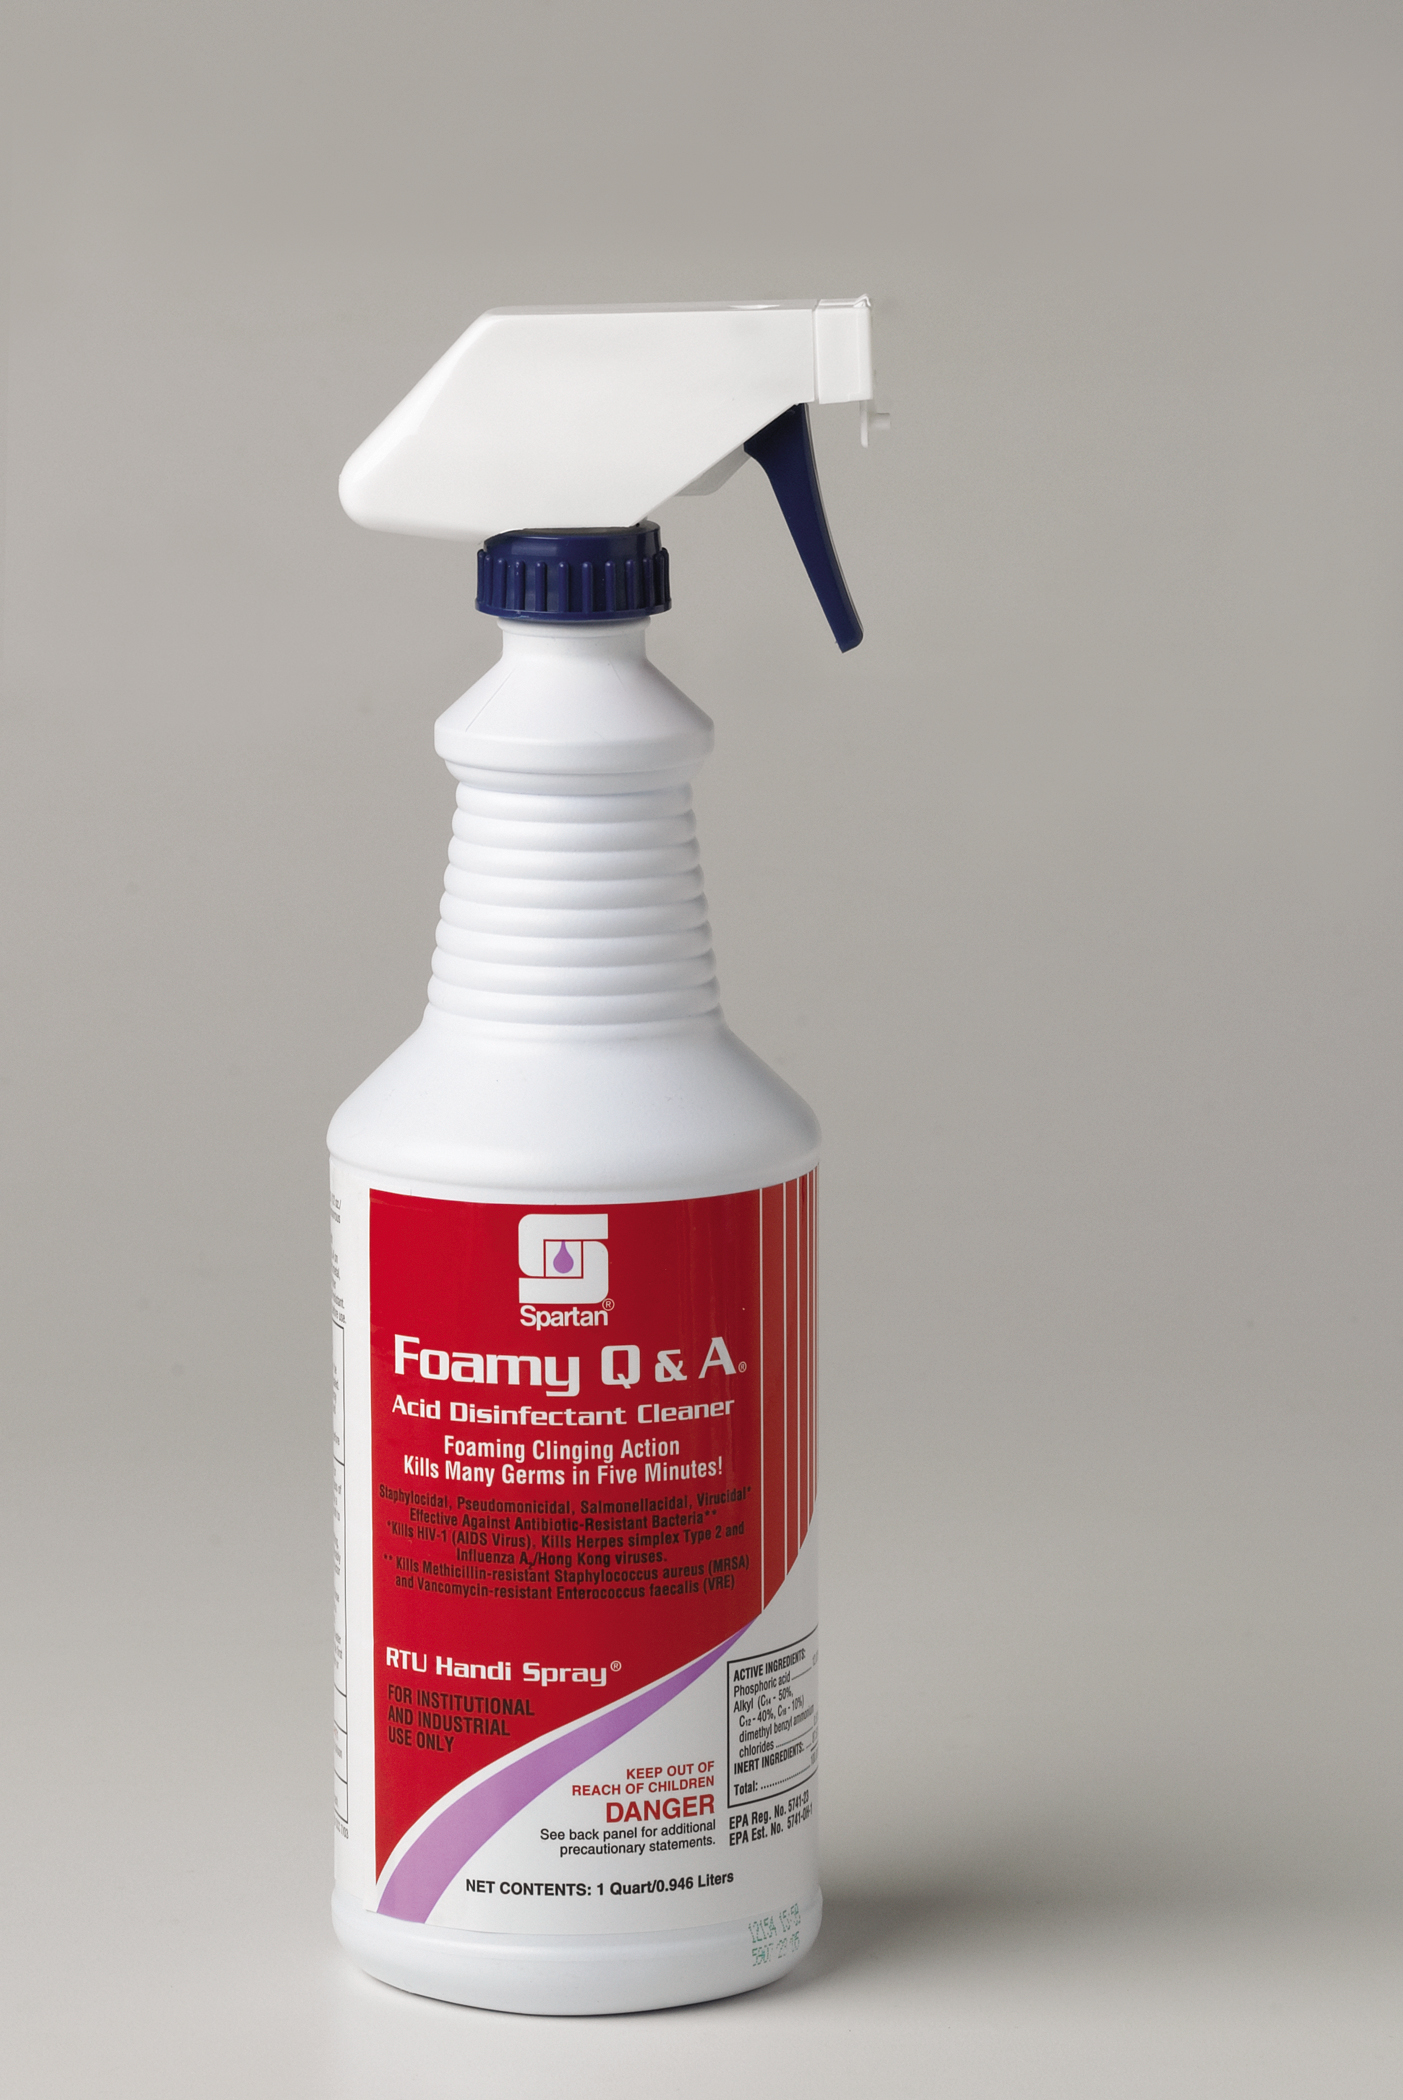 Foamy ready-to-use acid based restroom cleaner